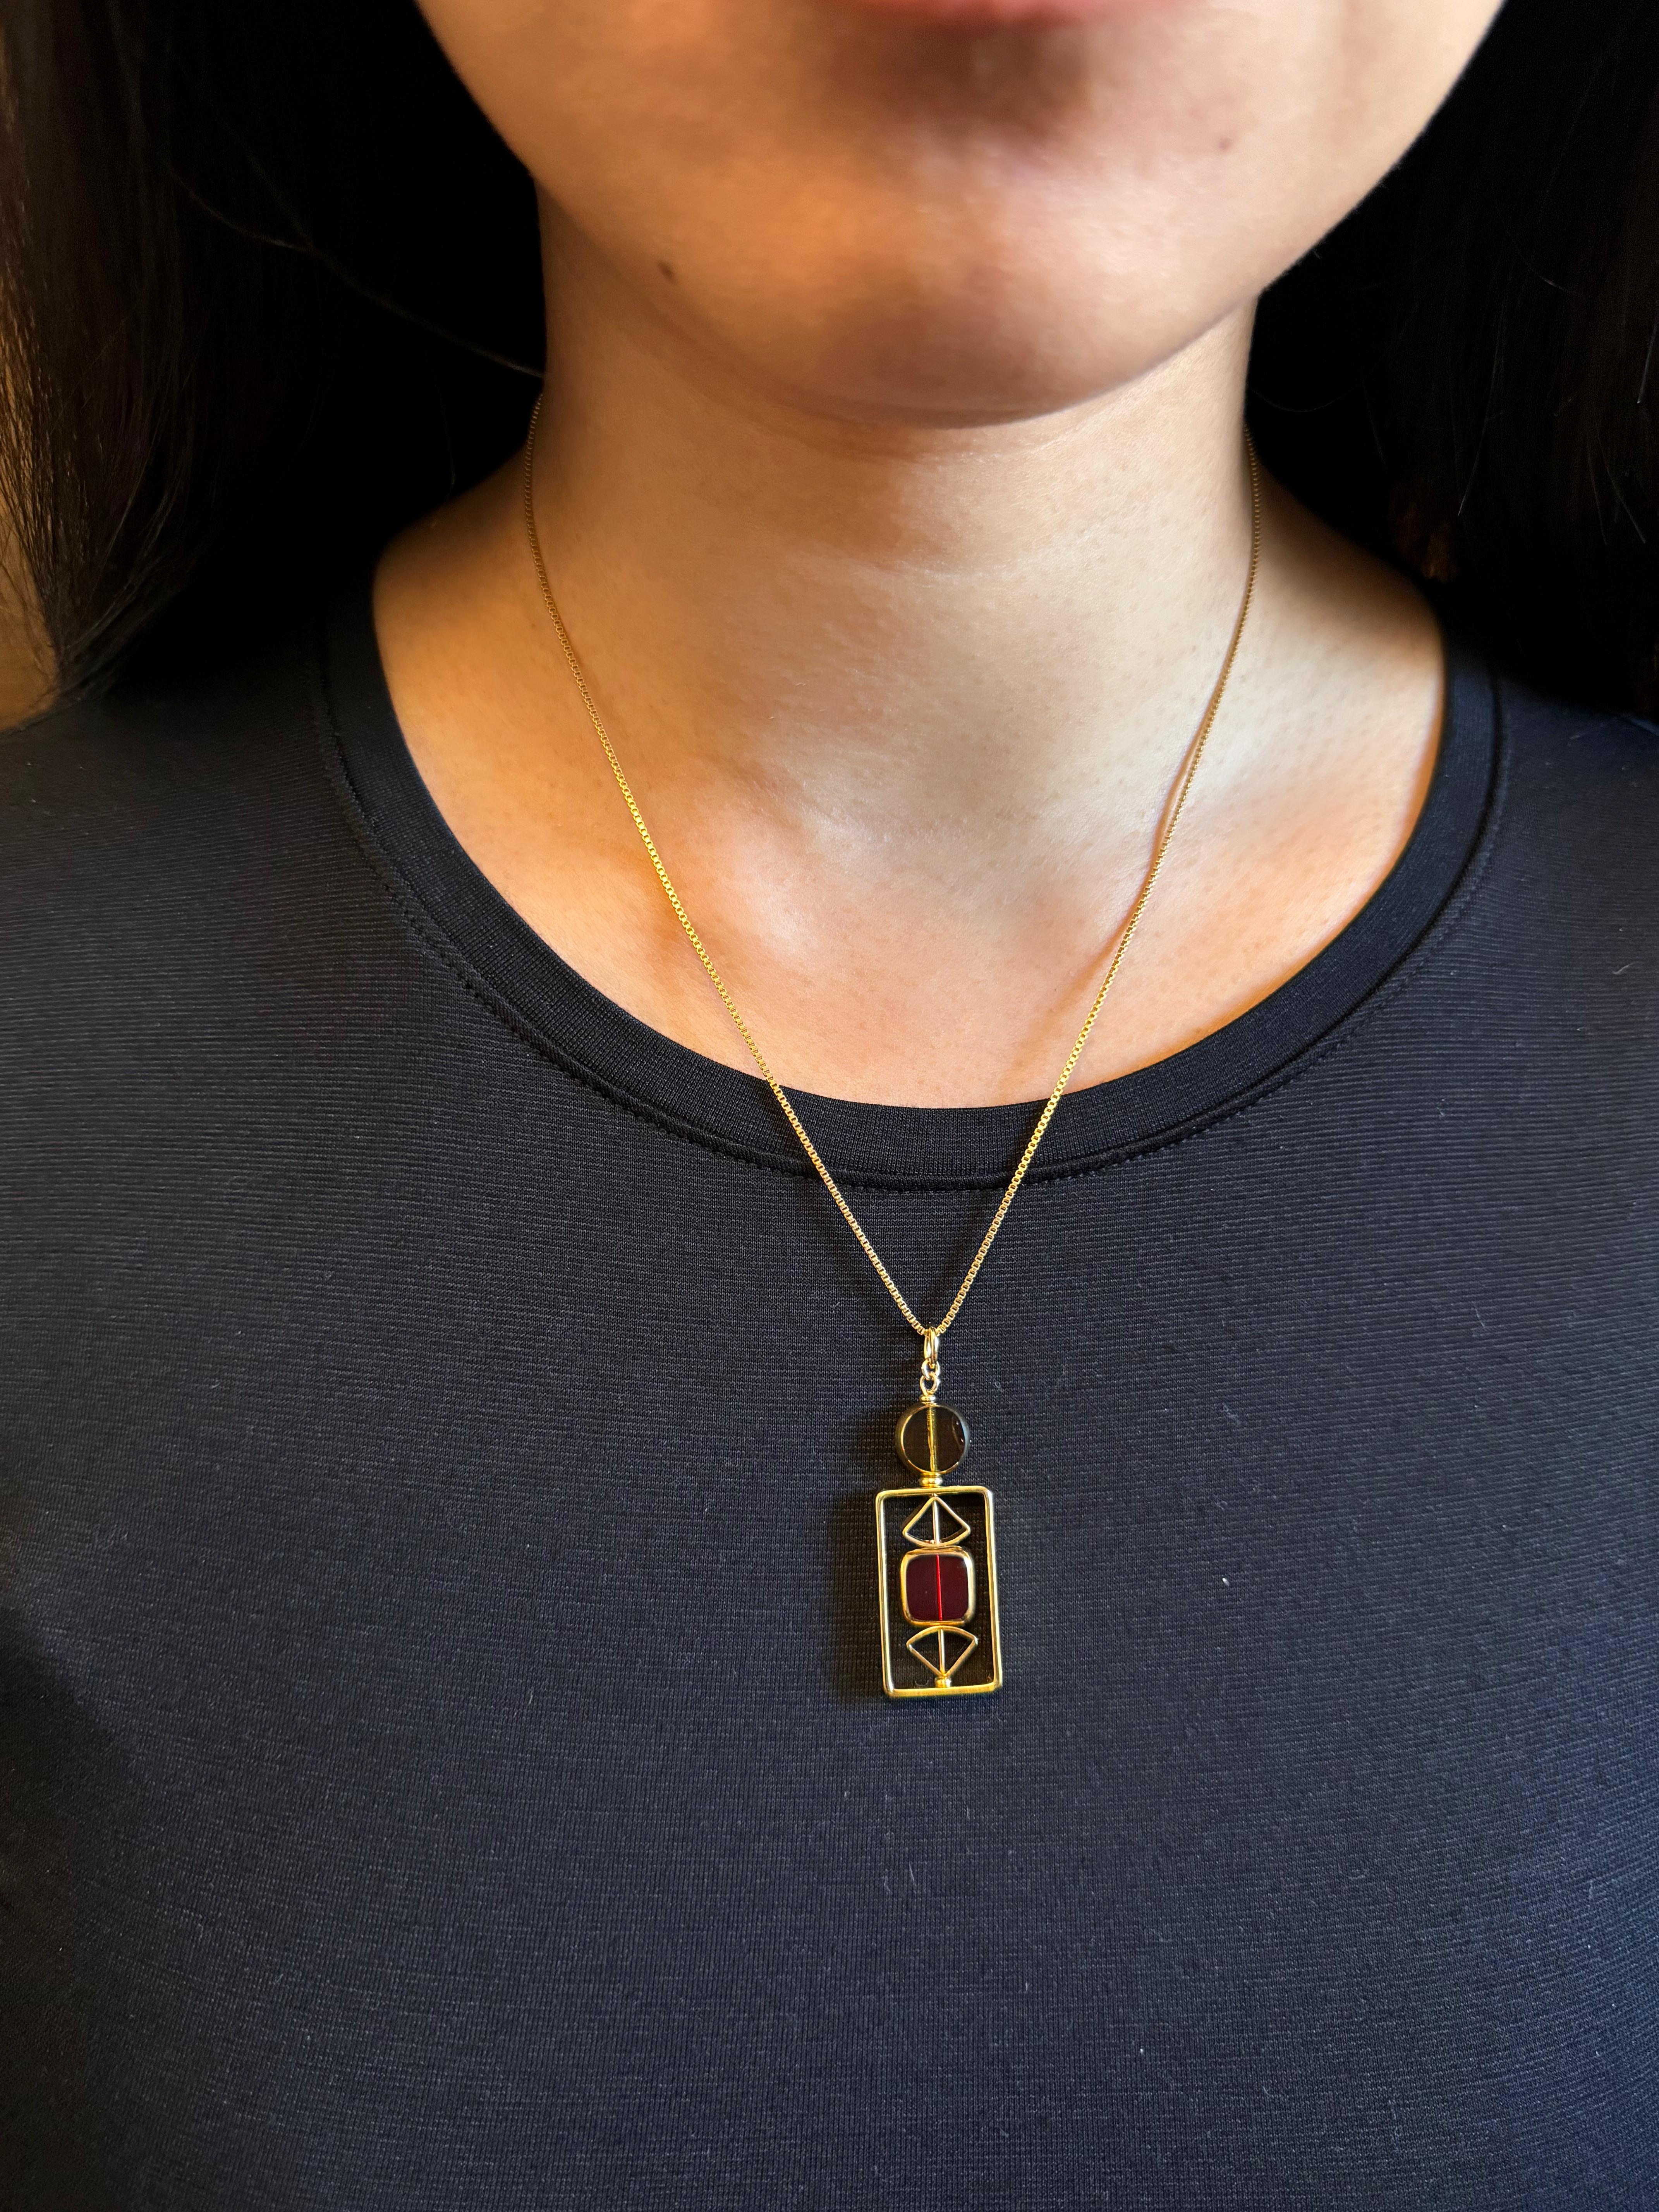 The pendant consists of translucent yellow and red vintage German glass beads and is finished with an 18-inch gold-filled chain. 

The beads are new old stock vintage German glass beads that are framed with 24K gold. The beads were hand-pressed